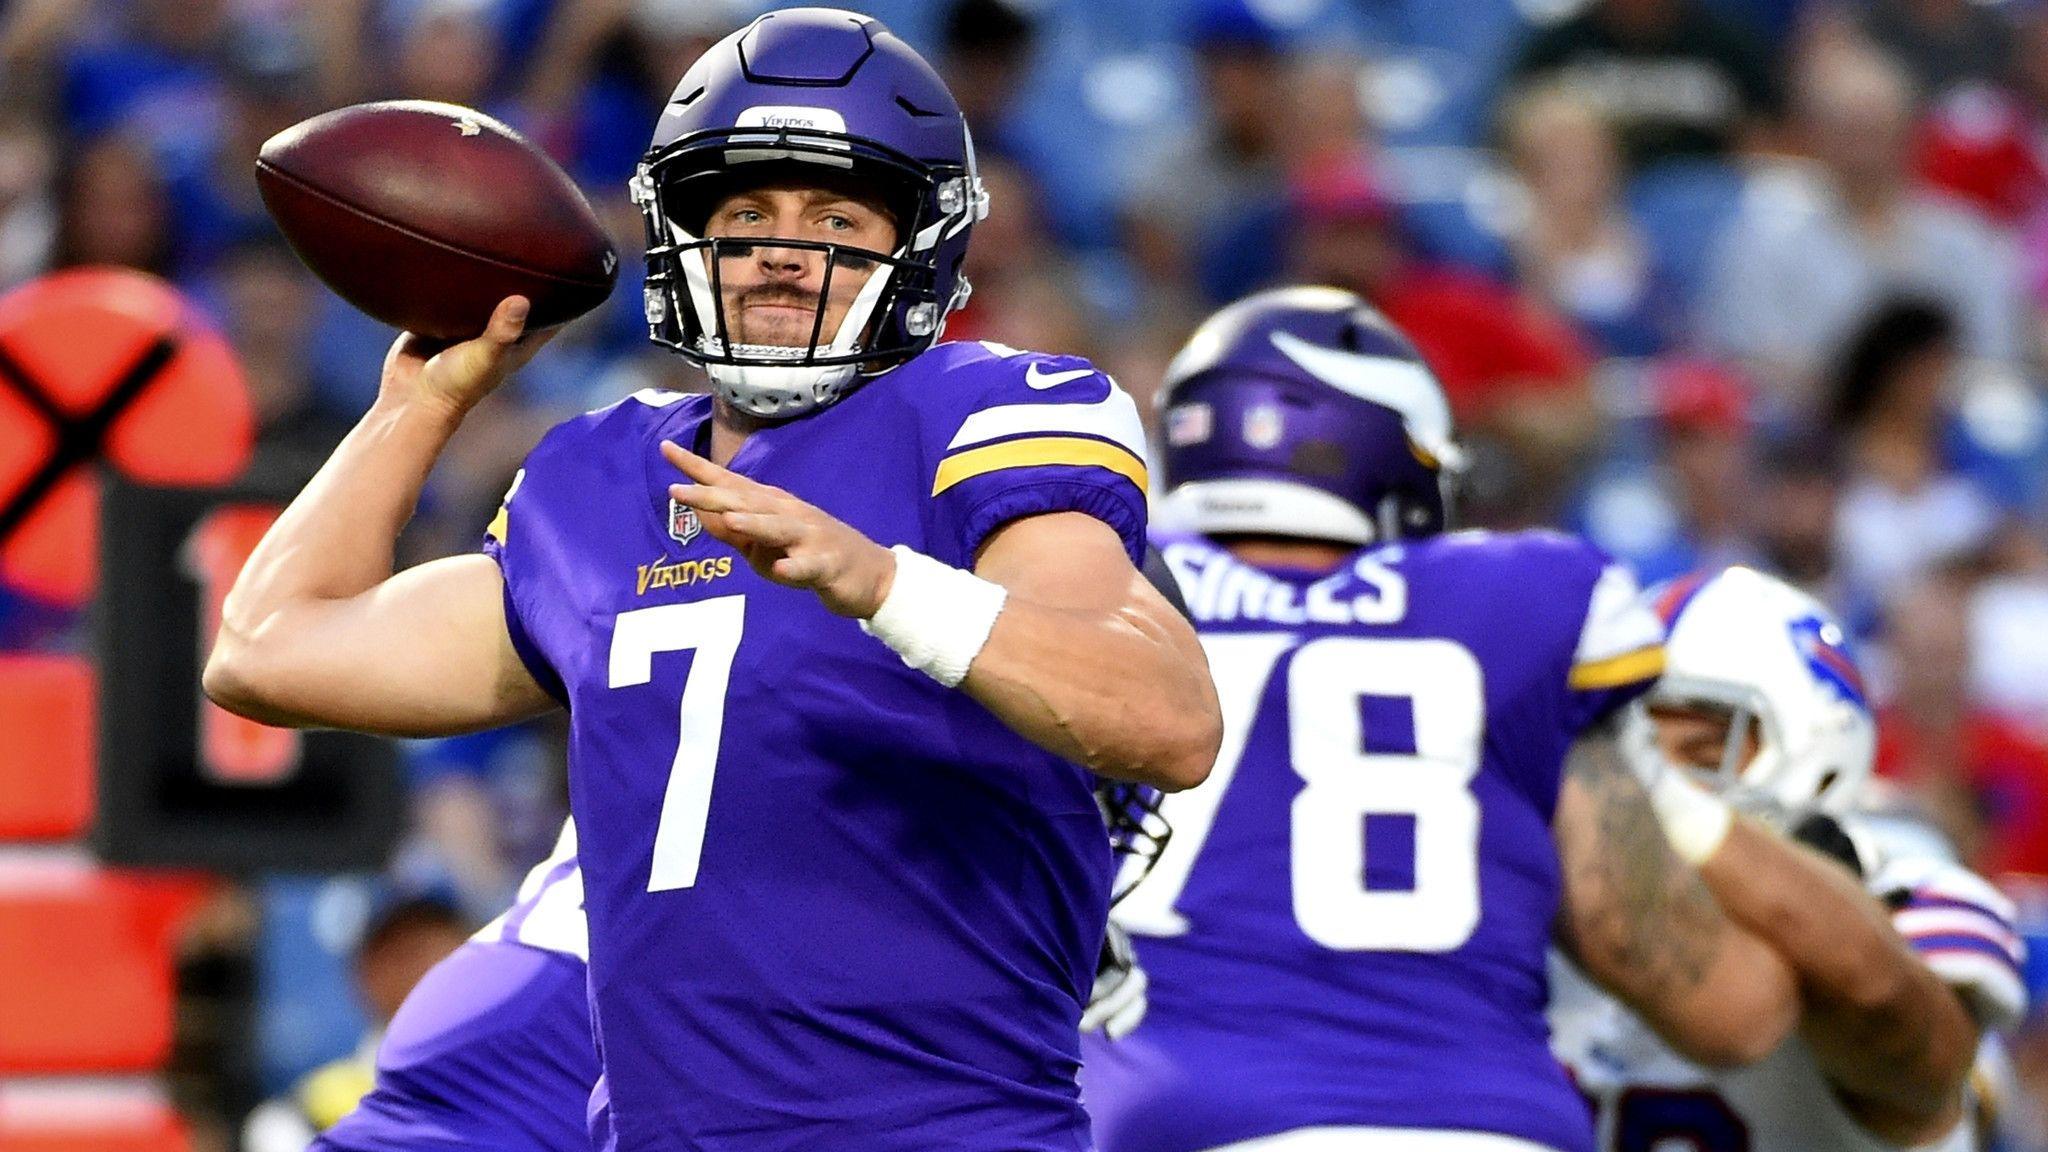 NFL notes: Case Keenum has a solid debut for the Vikings